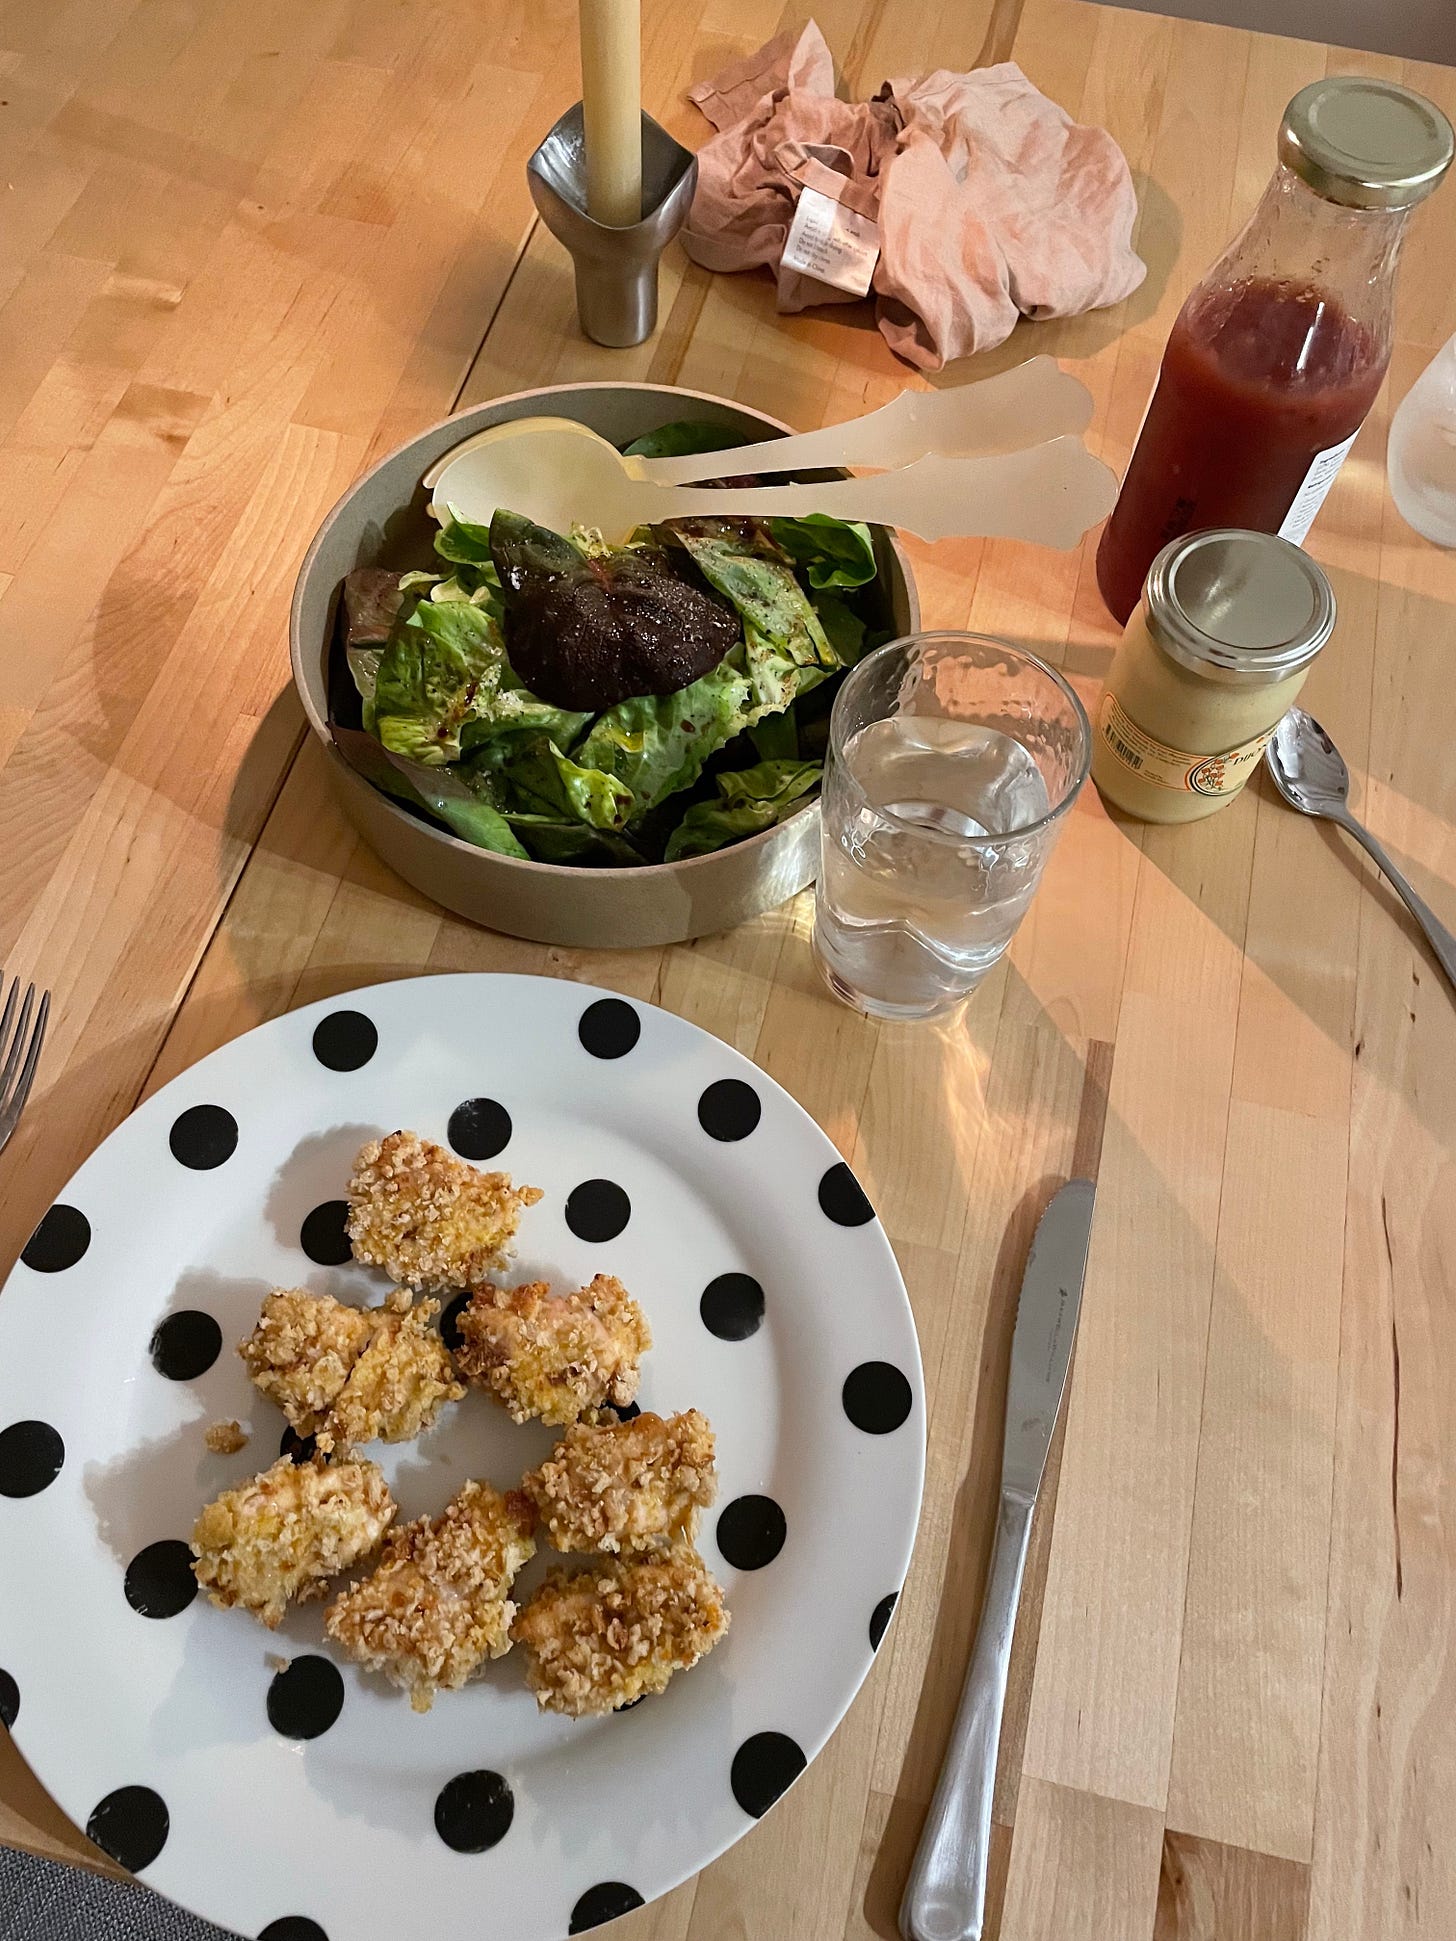 Dining table with a plate of chicken nuggets, green salad, mustard and tomato sauce. A fun meal for adults too.